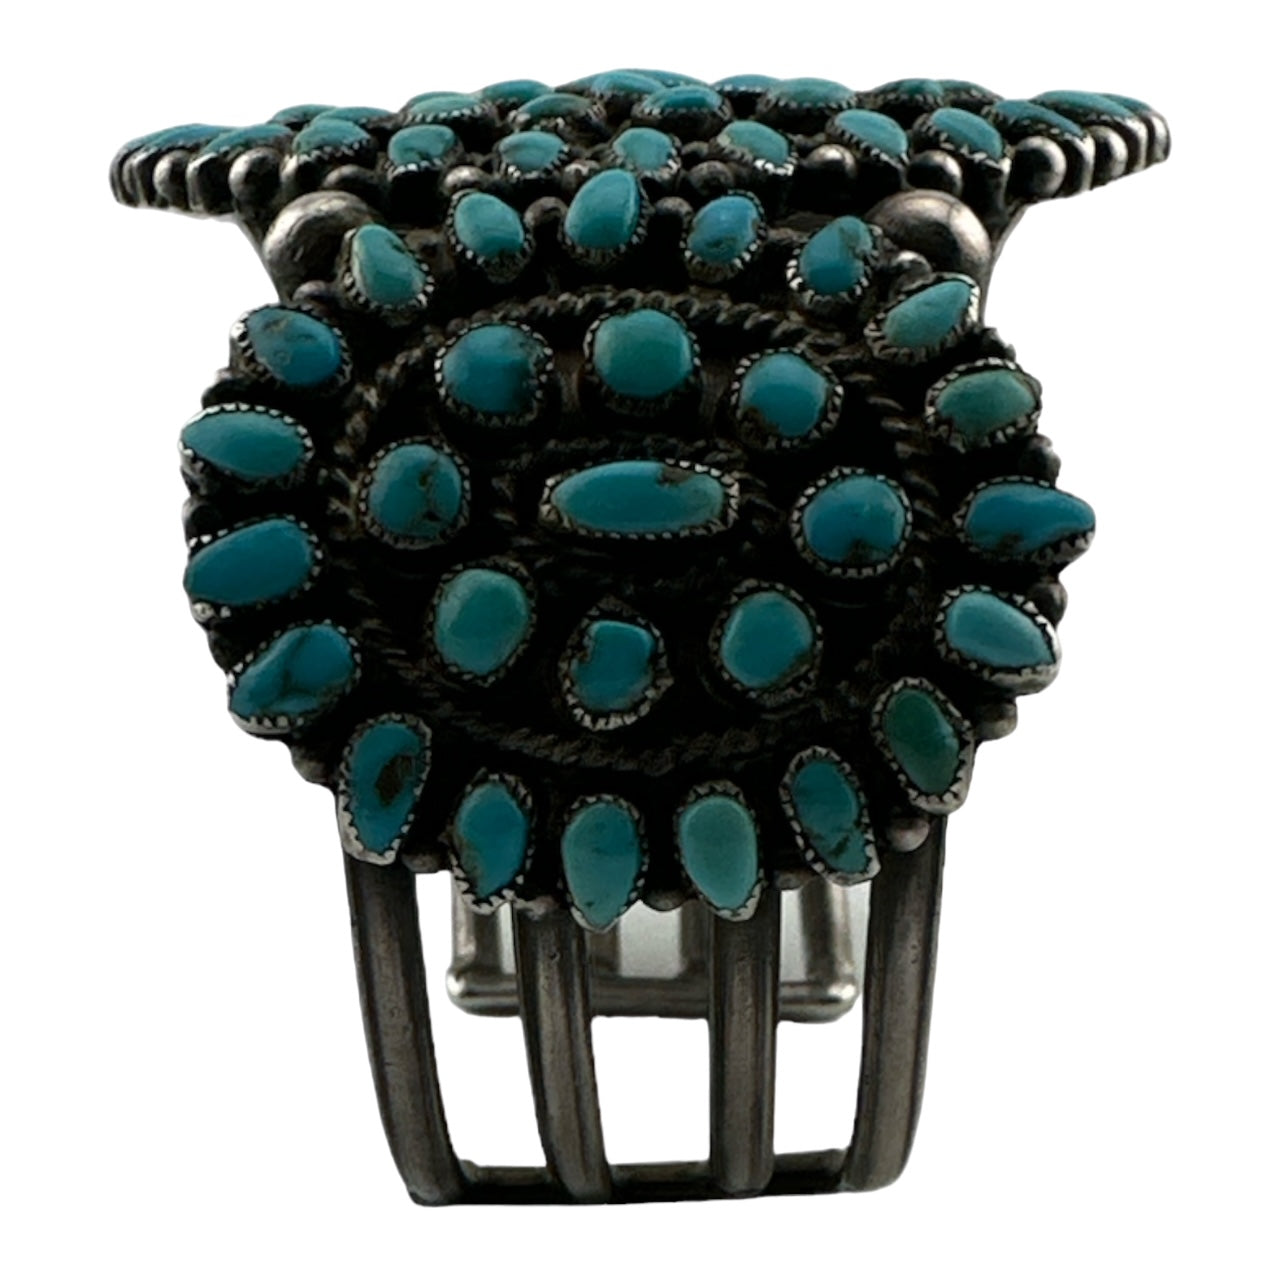 Zuni Vintage Turquoise Cluster Bracelet, authentic native american jewelry for sale, telluride jewelry store, telluride gallery